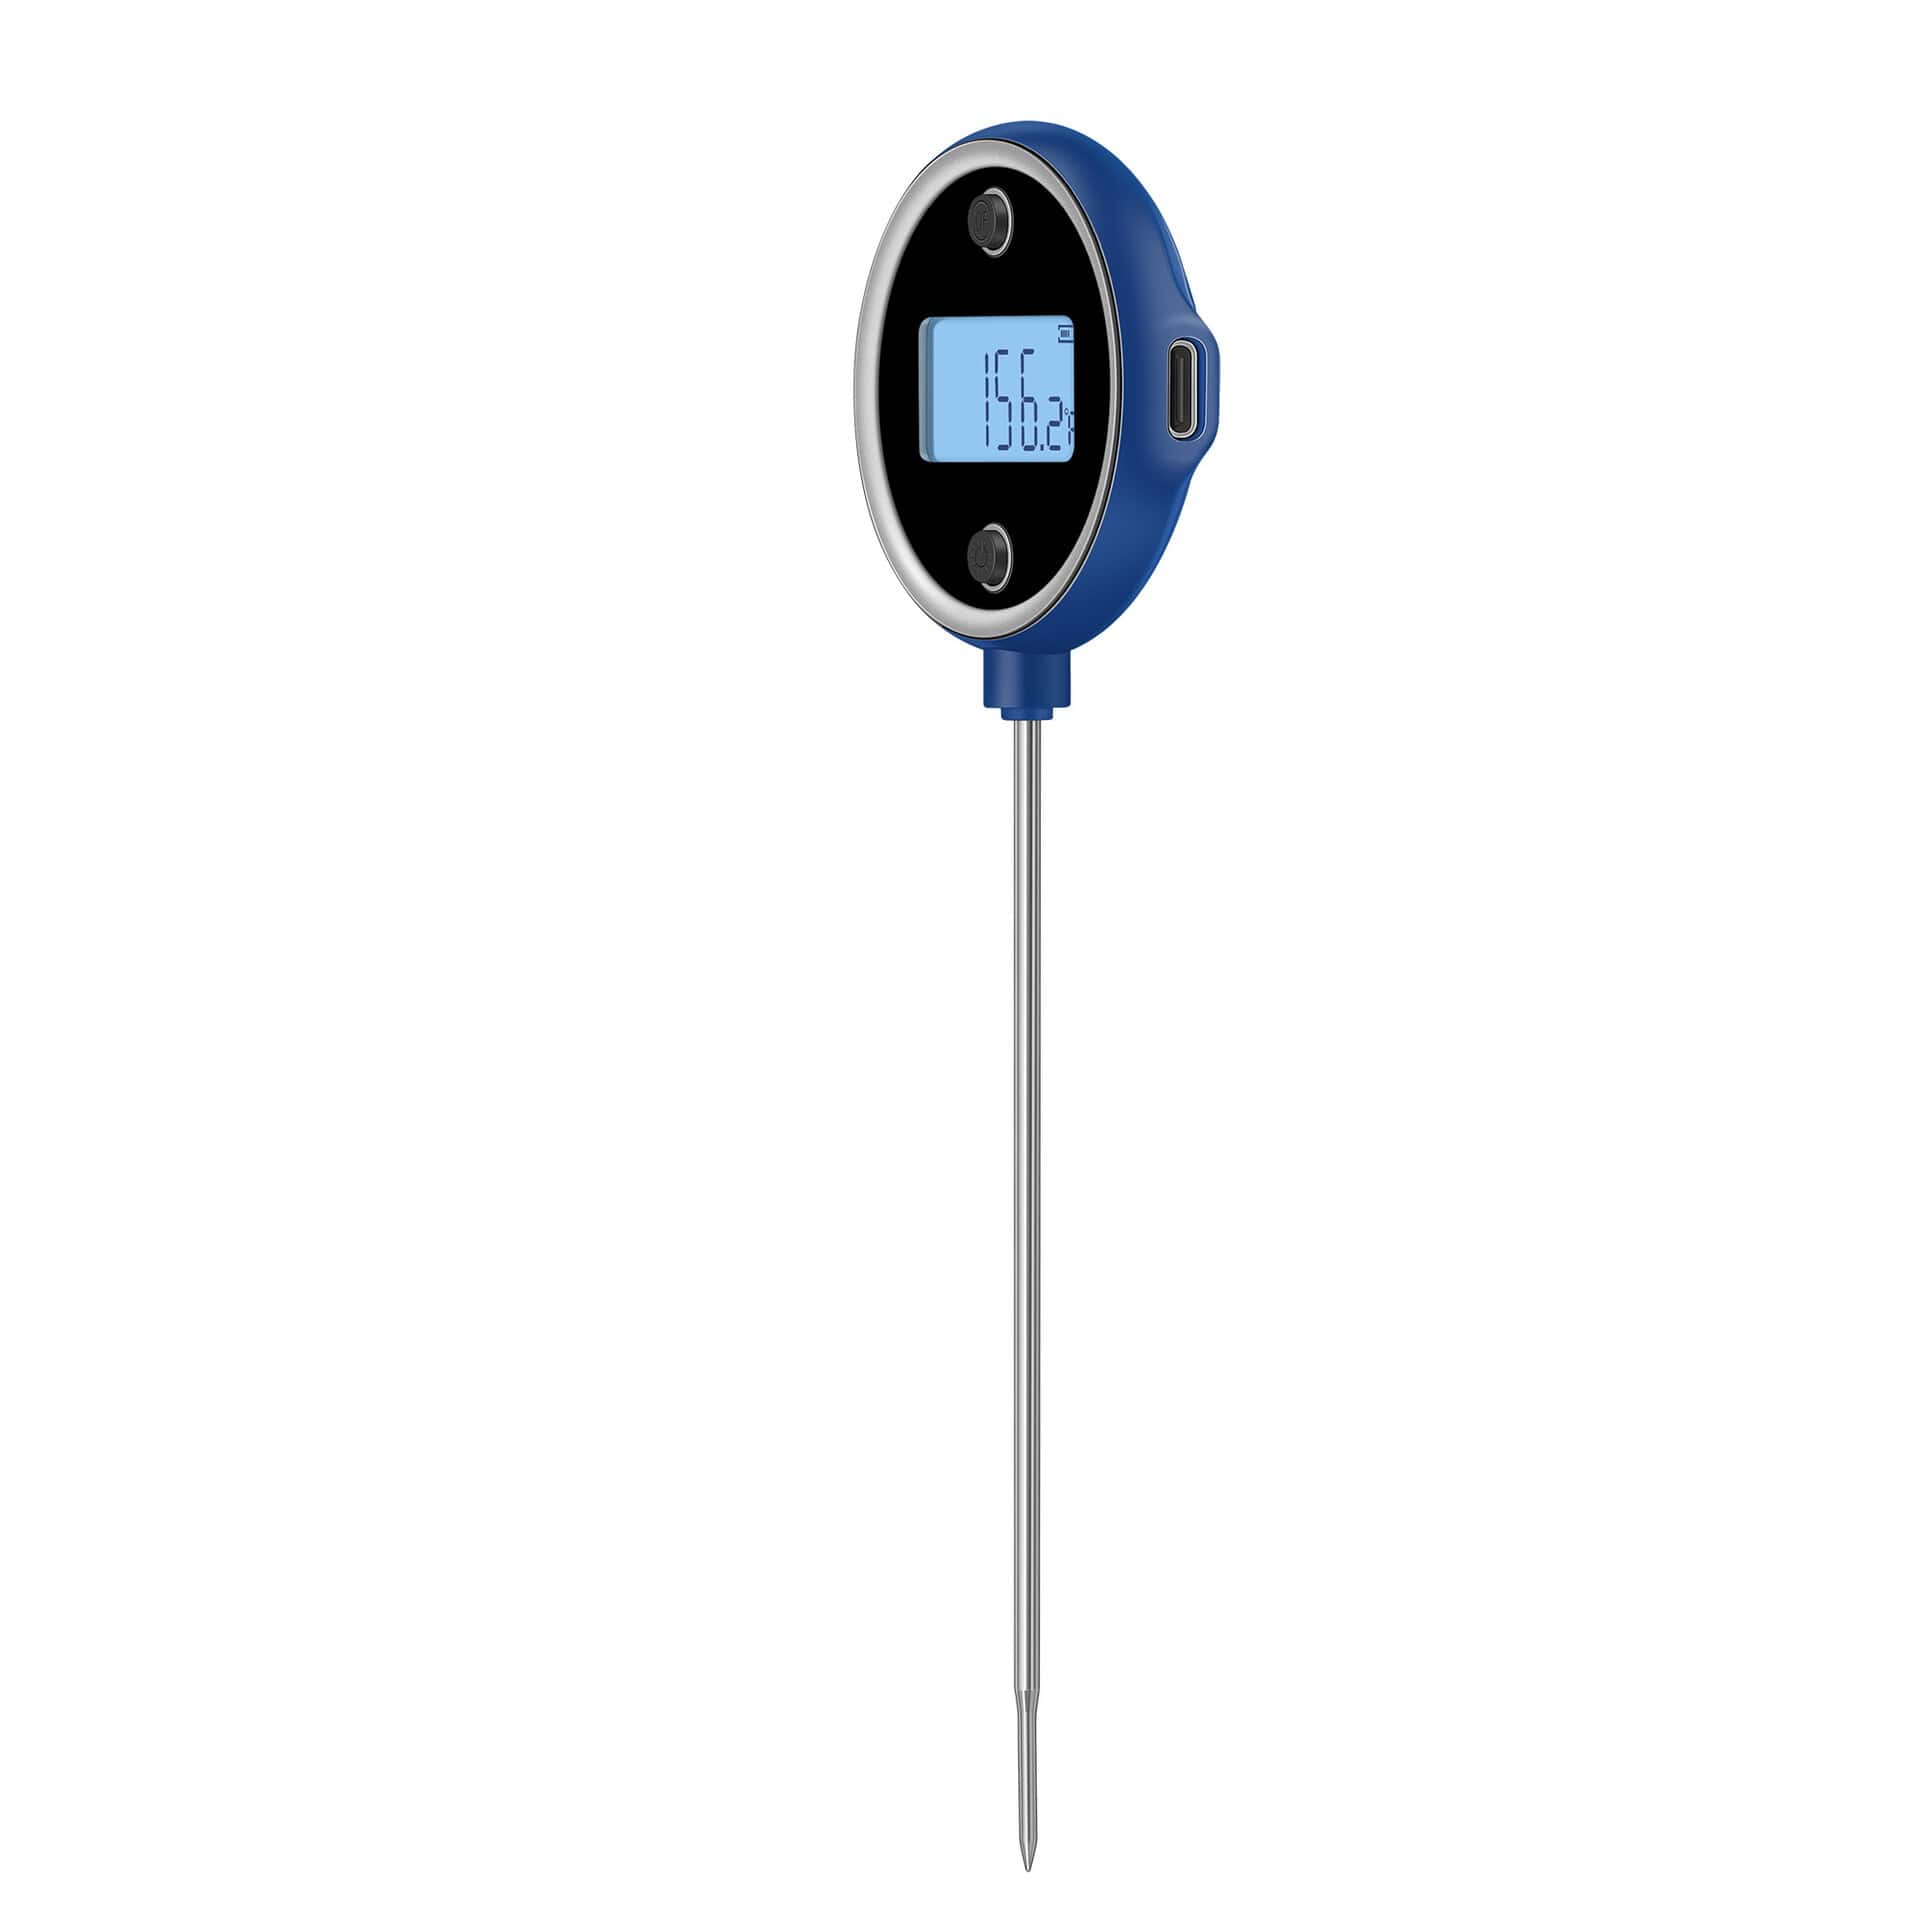 https://www.chefstemp.com/wp-content/uploads/2021/08/chefstemp-pocket-pro-cooking-thermometer-06.jpg